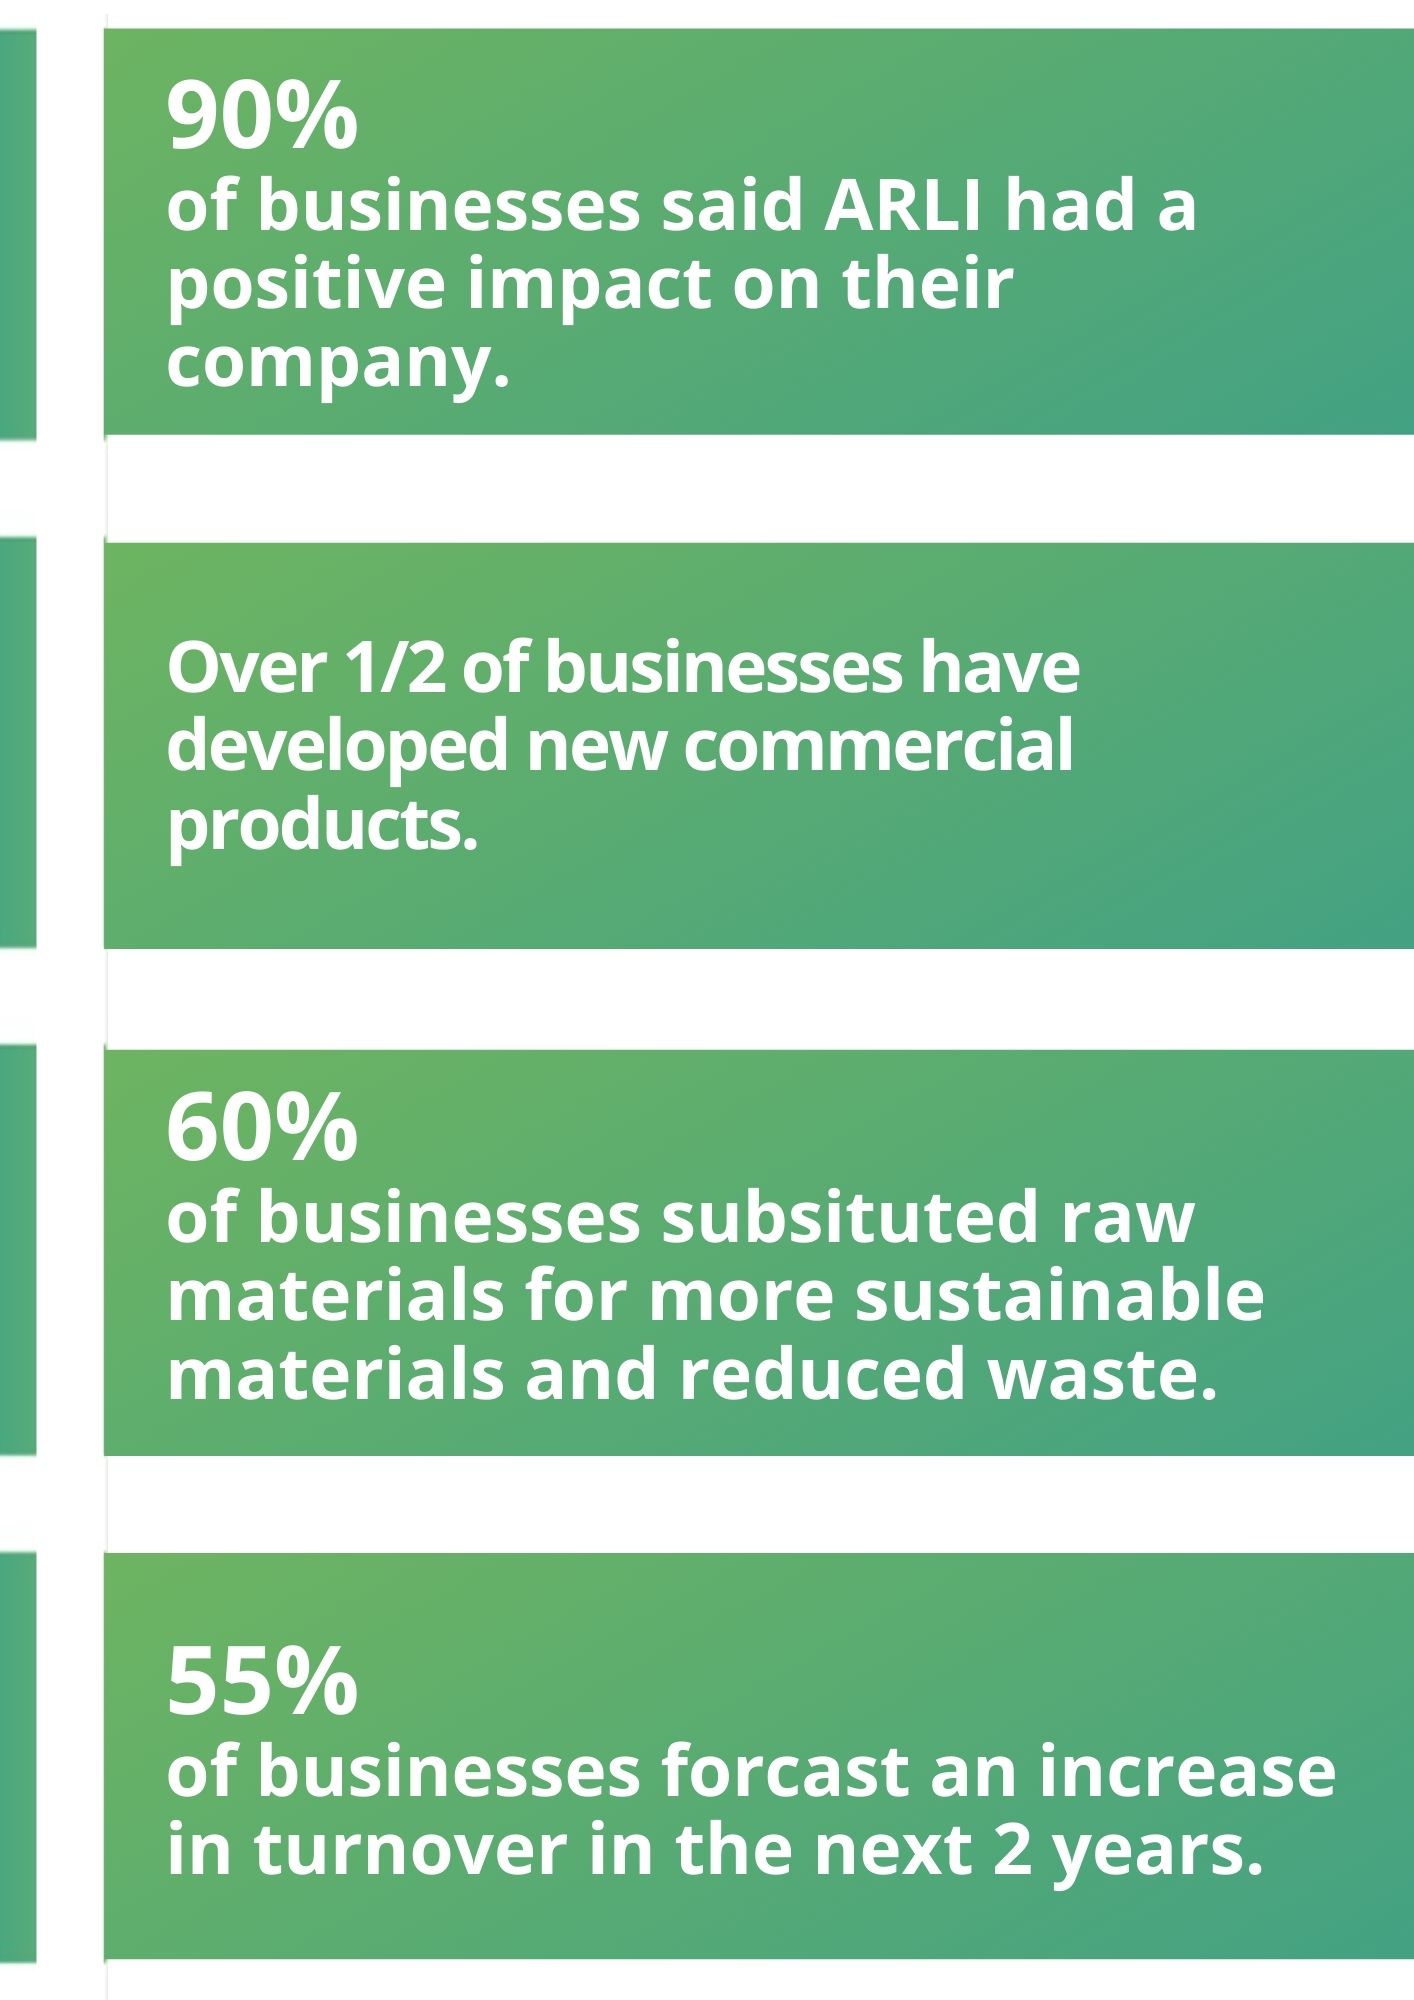 ARLI Stats - 90% of businesses said ARLI had a positive impact on their company. Over 1/2 of businesses have developed new commercial products. 60% of businesses substituted raw materials for more sustainable materials and reduced waste. 55% of businesses forecast an increase in turnover in the next 2 years